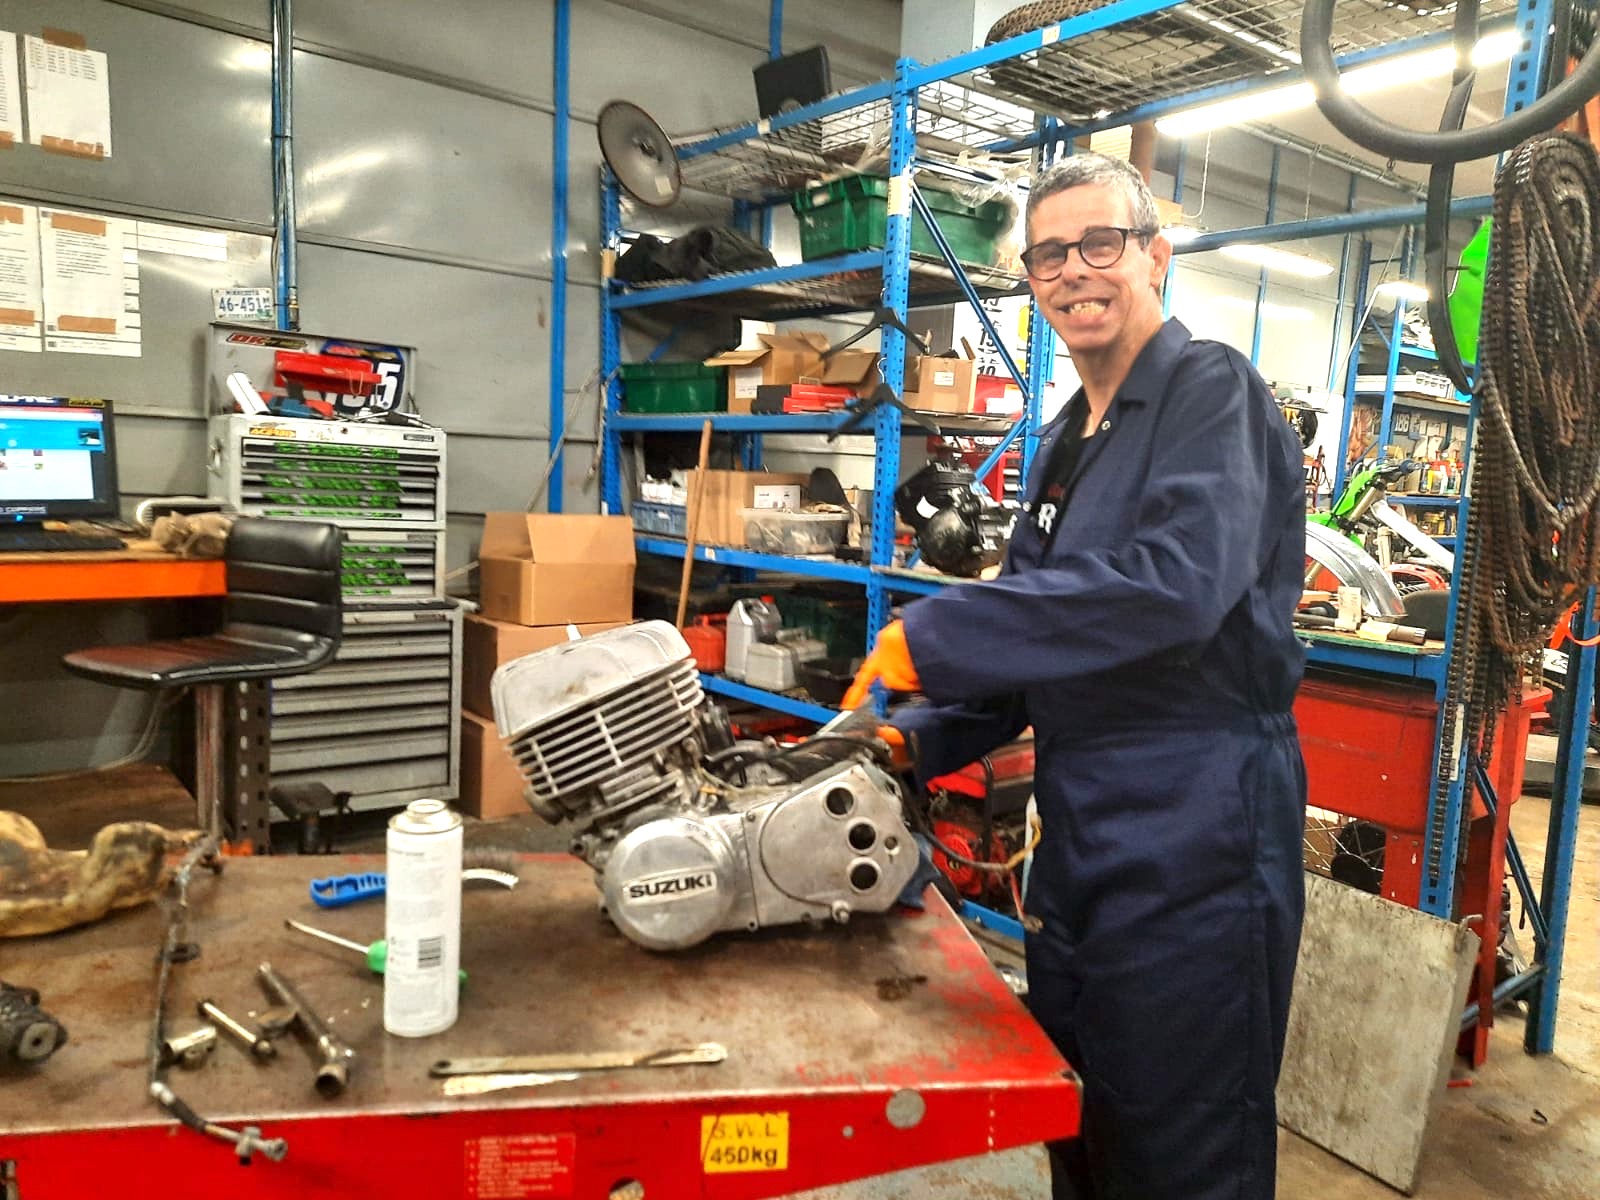 Motorbike enthusiast with a learning disability finds volunteer work at mechanics